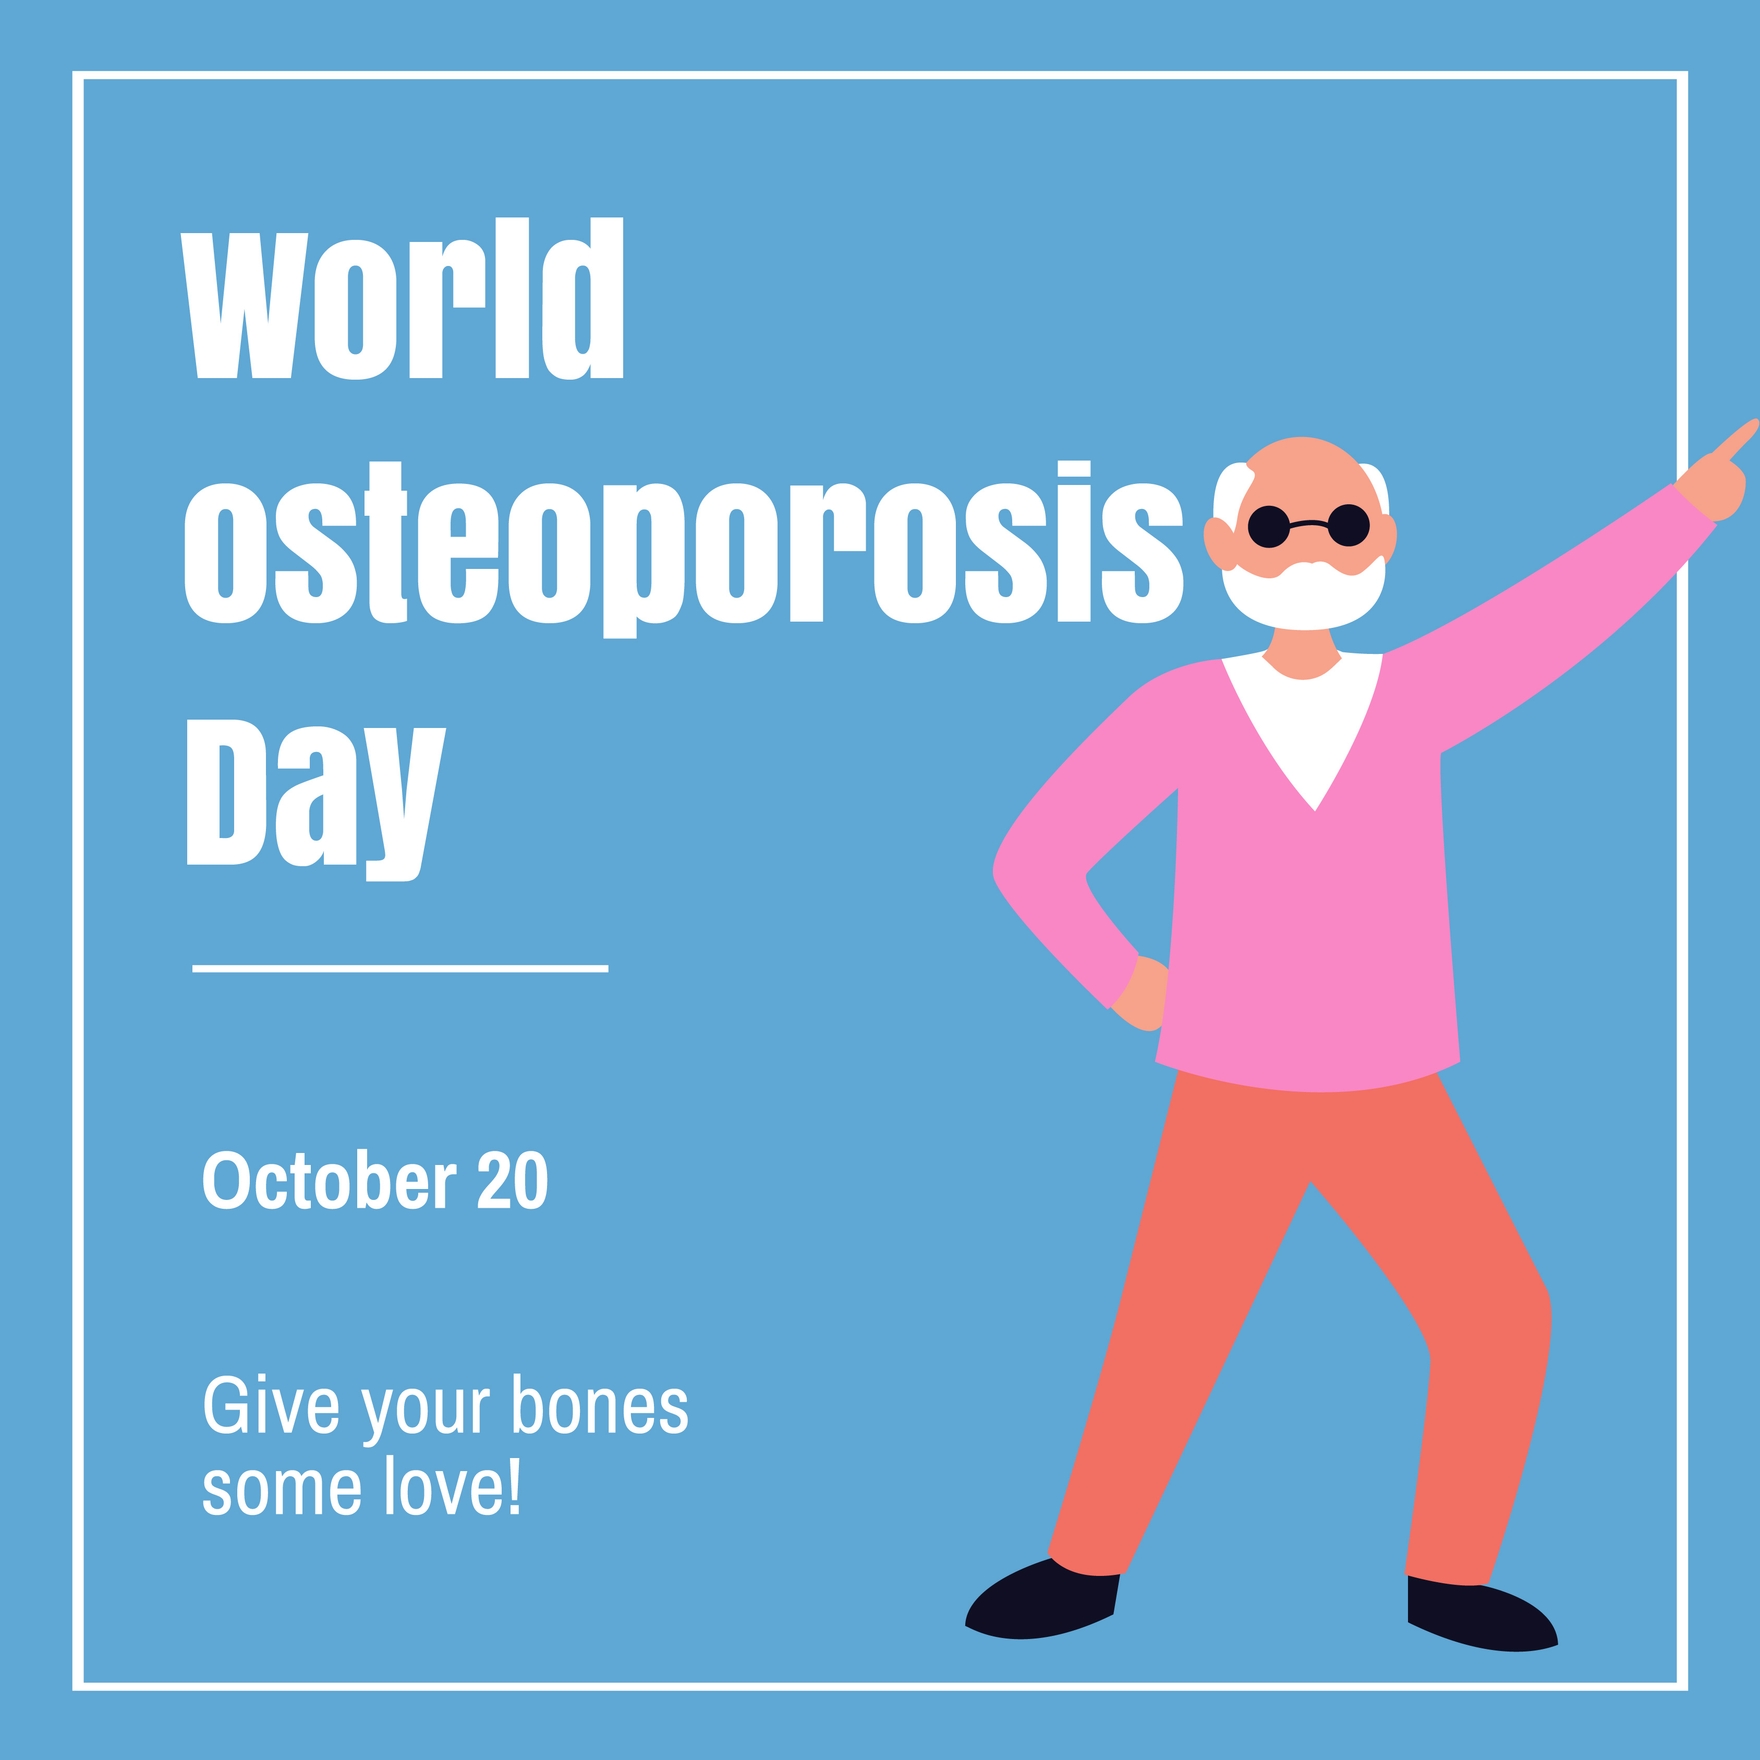 World Osteoporosis Day FB Post in Illustrator, PSD, EPS, SVG, JPG, PNG